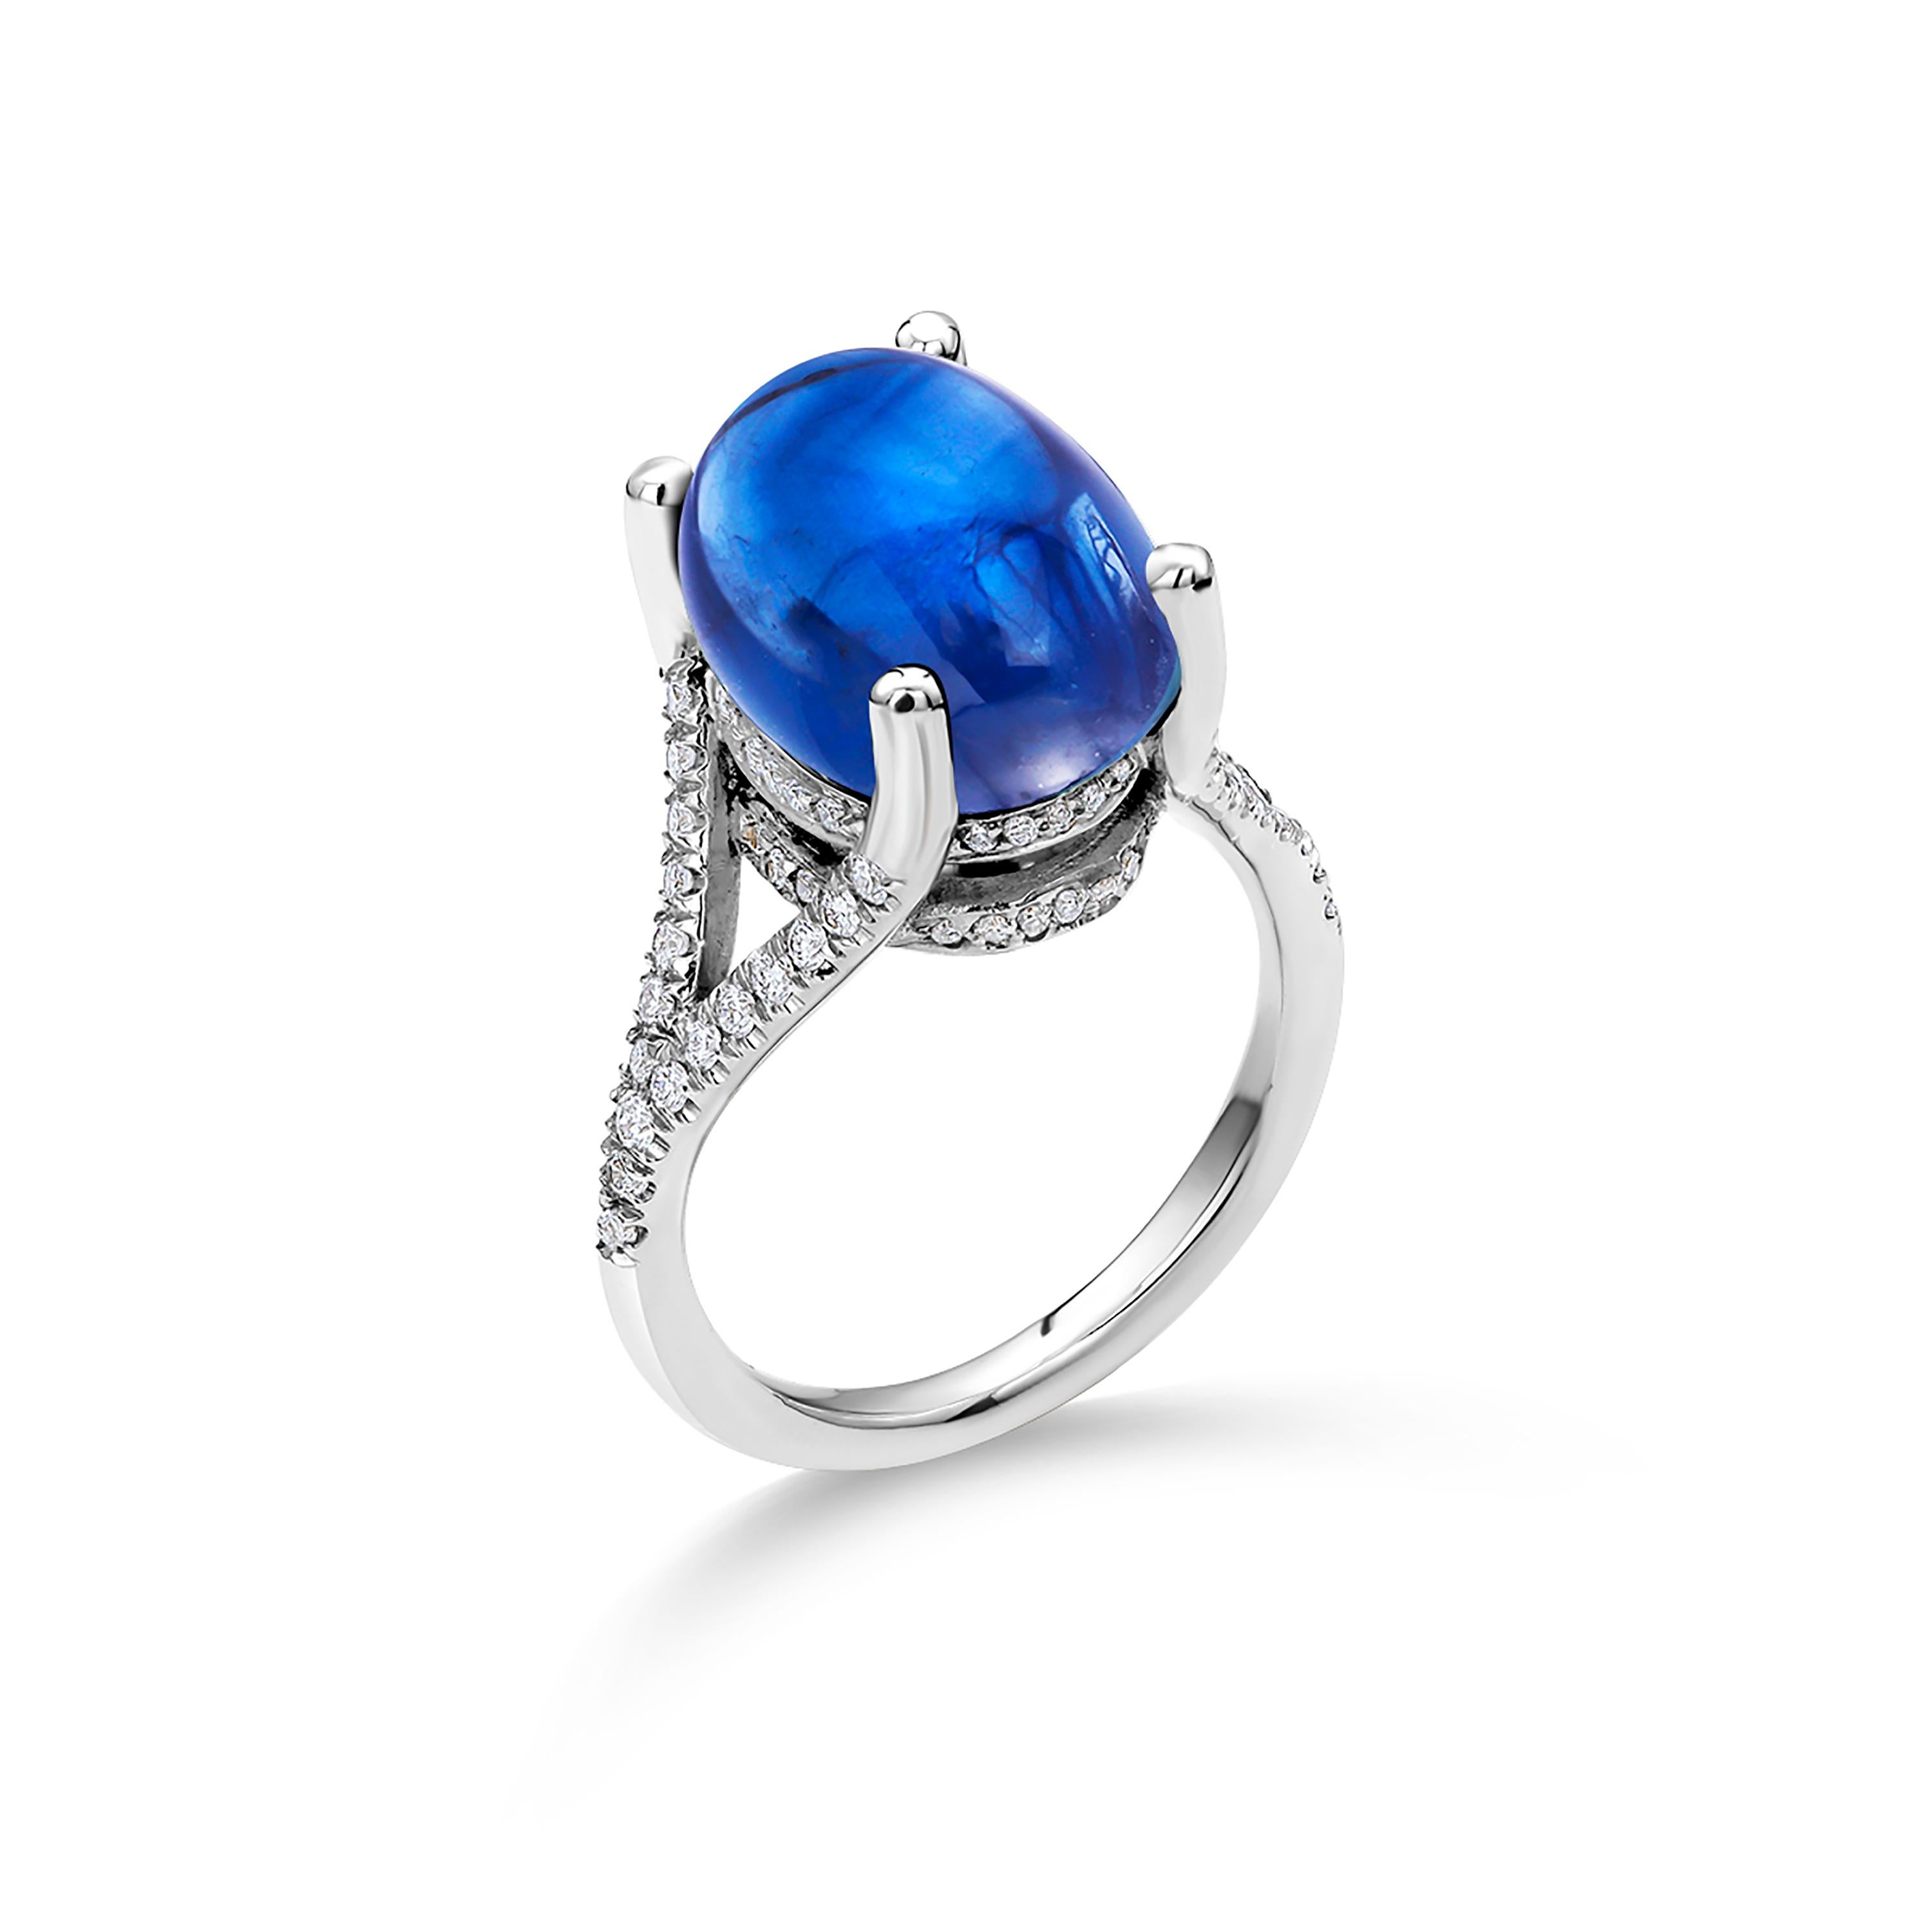 Ceylon Cabochon Sapphire Diamond Gold Cocktail Ring Weighing 17.77 Carats 4